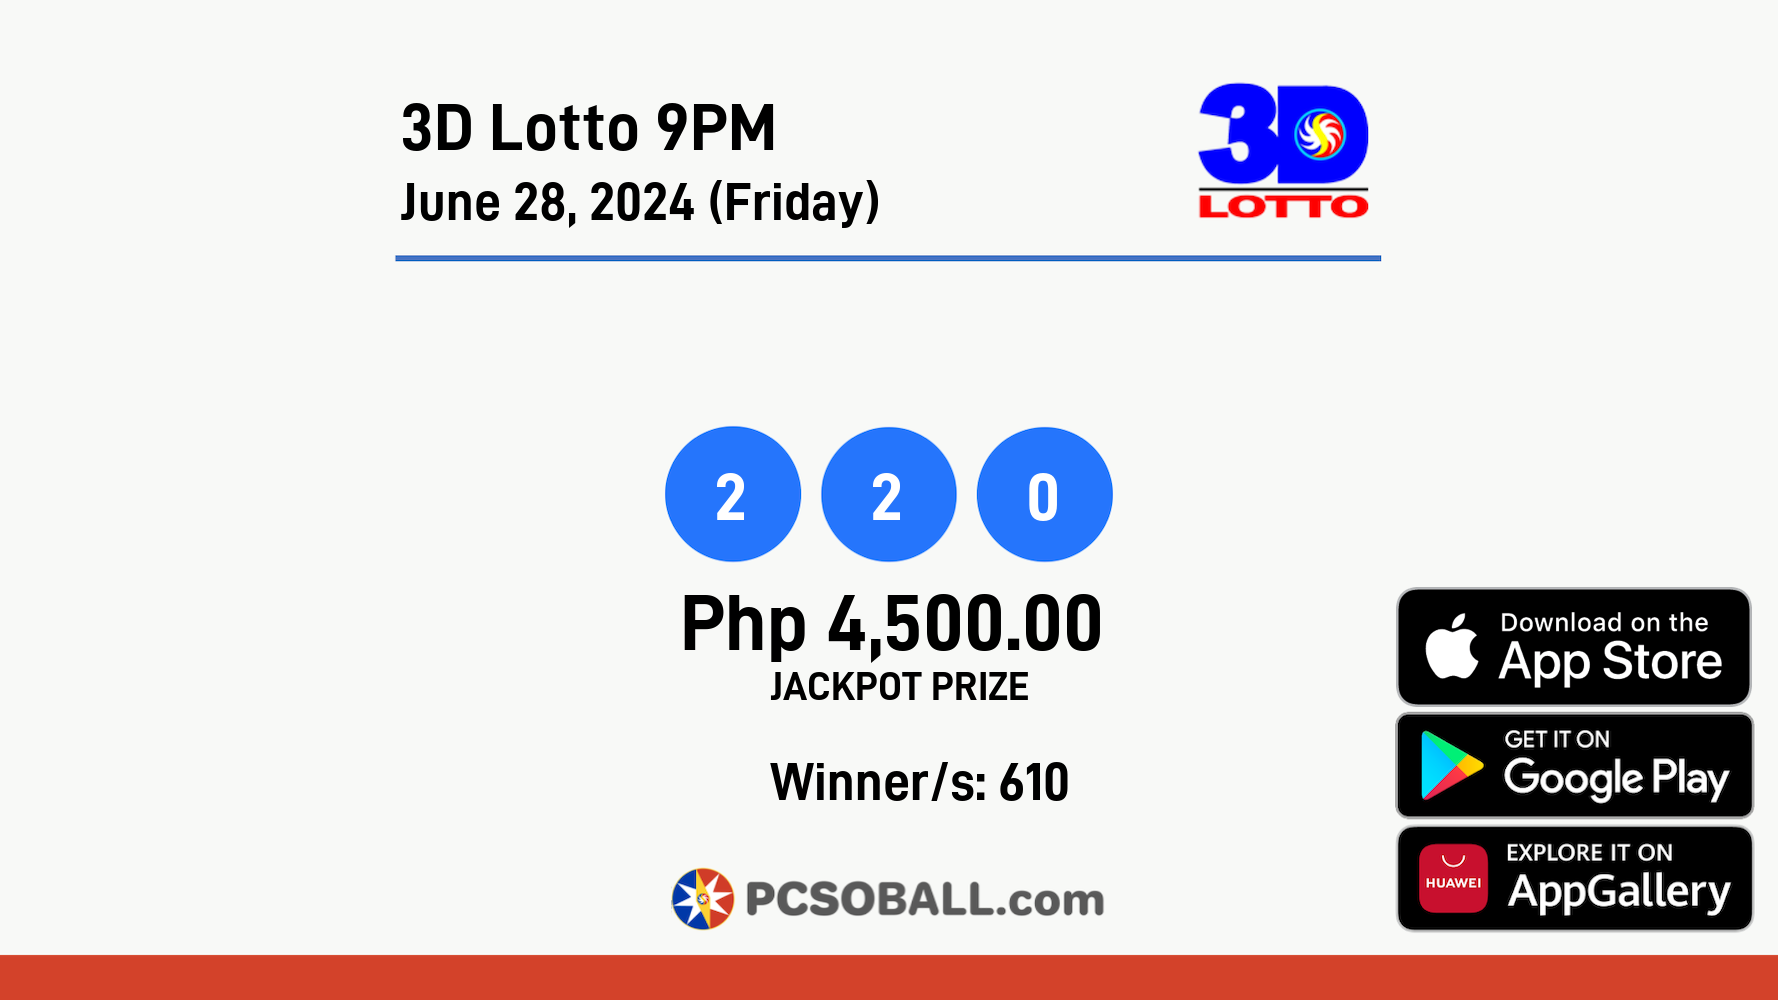 3D Lotto 9PM June 28, 2024 (Friday) Result